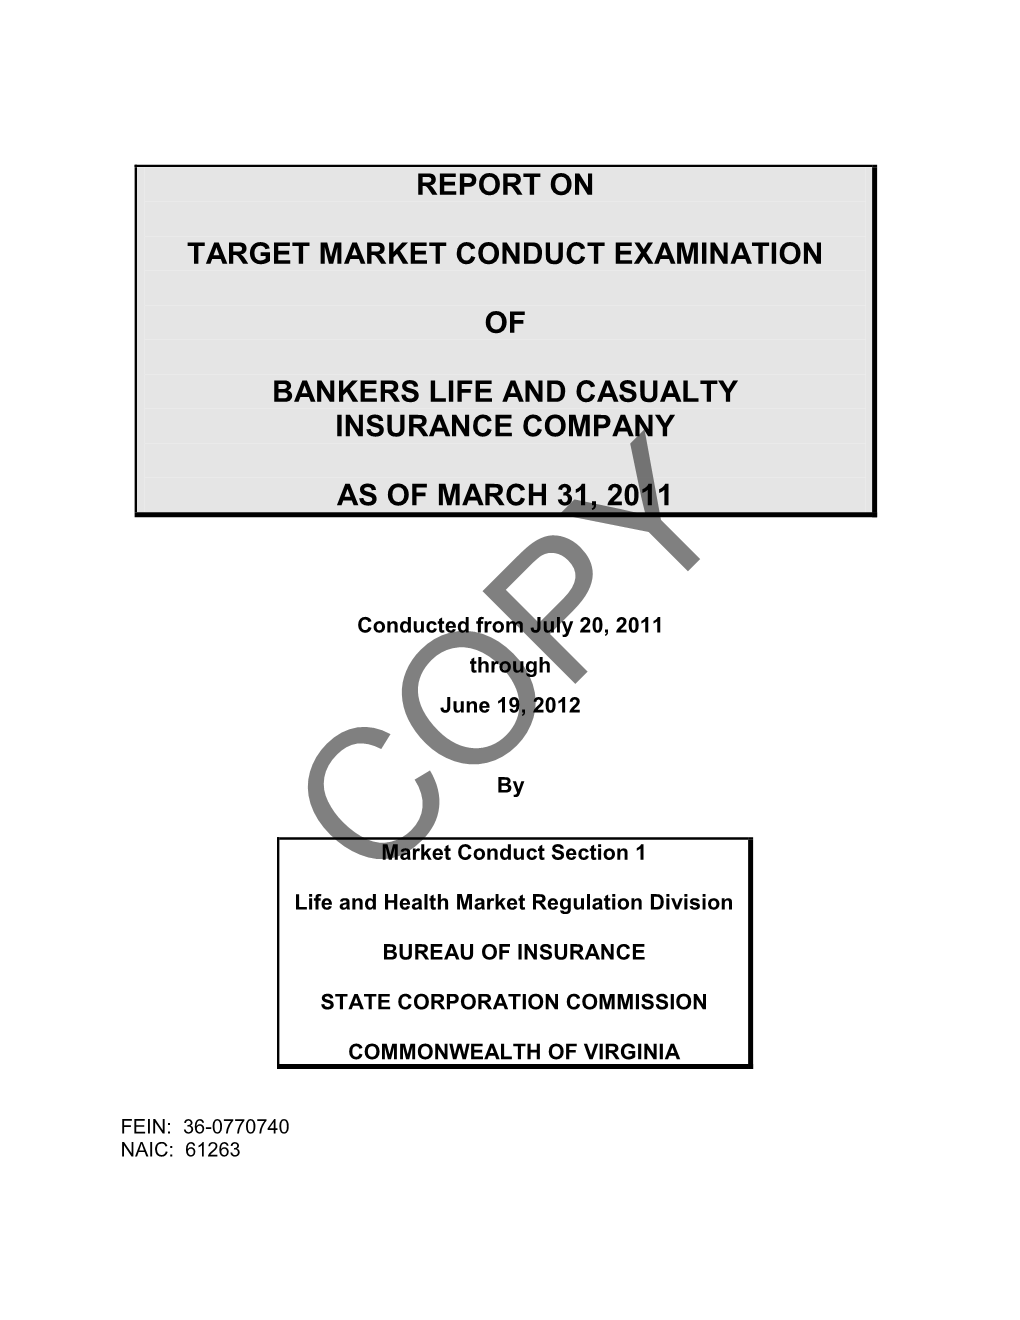 Report on Target Market Conduct Examination of Bankers Life and Casualty Insurance Company (The “Report”)